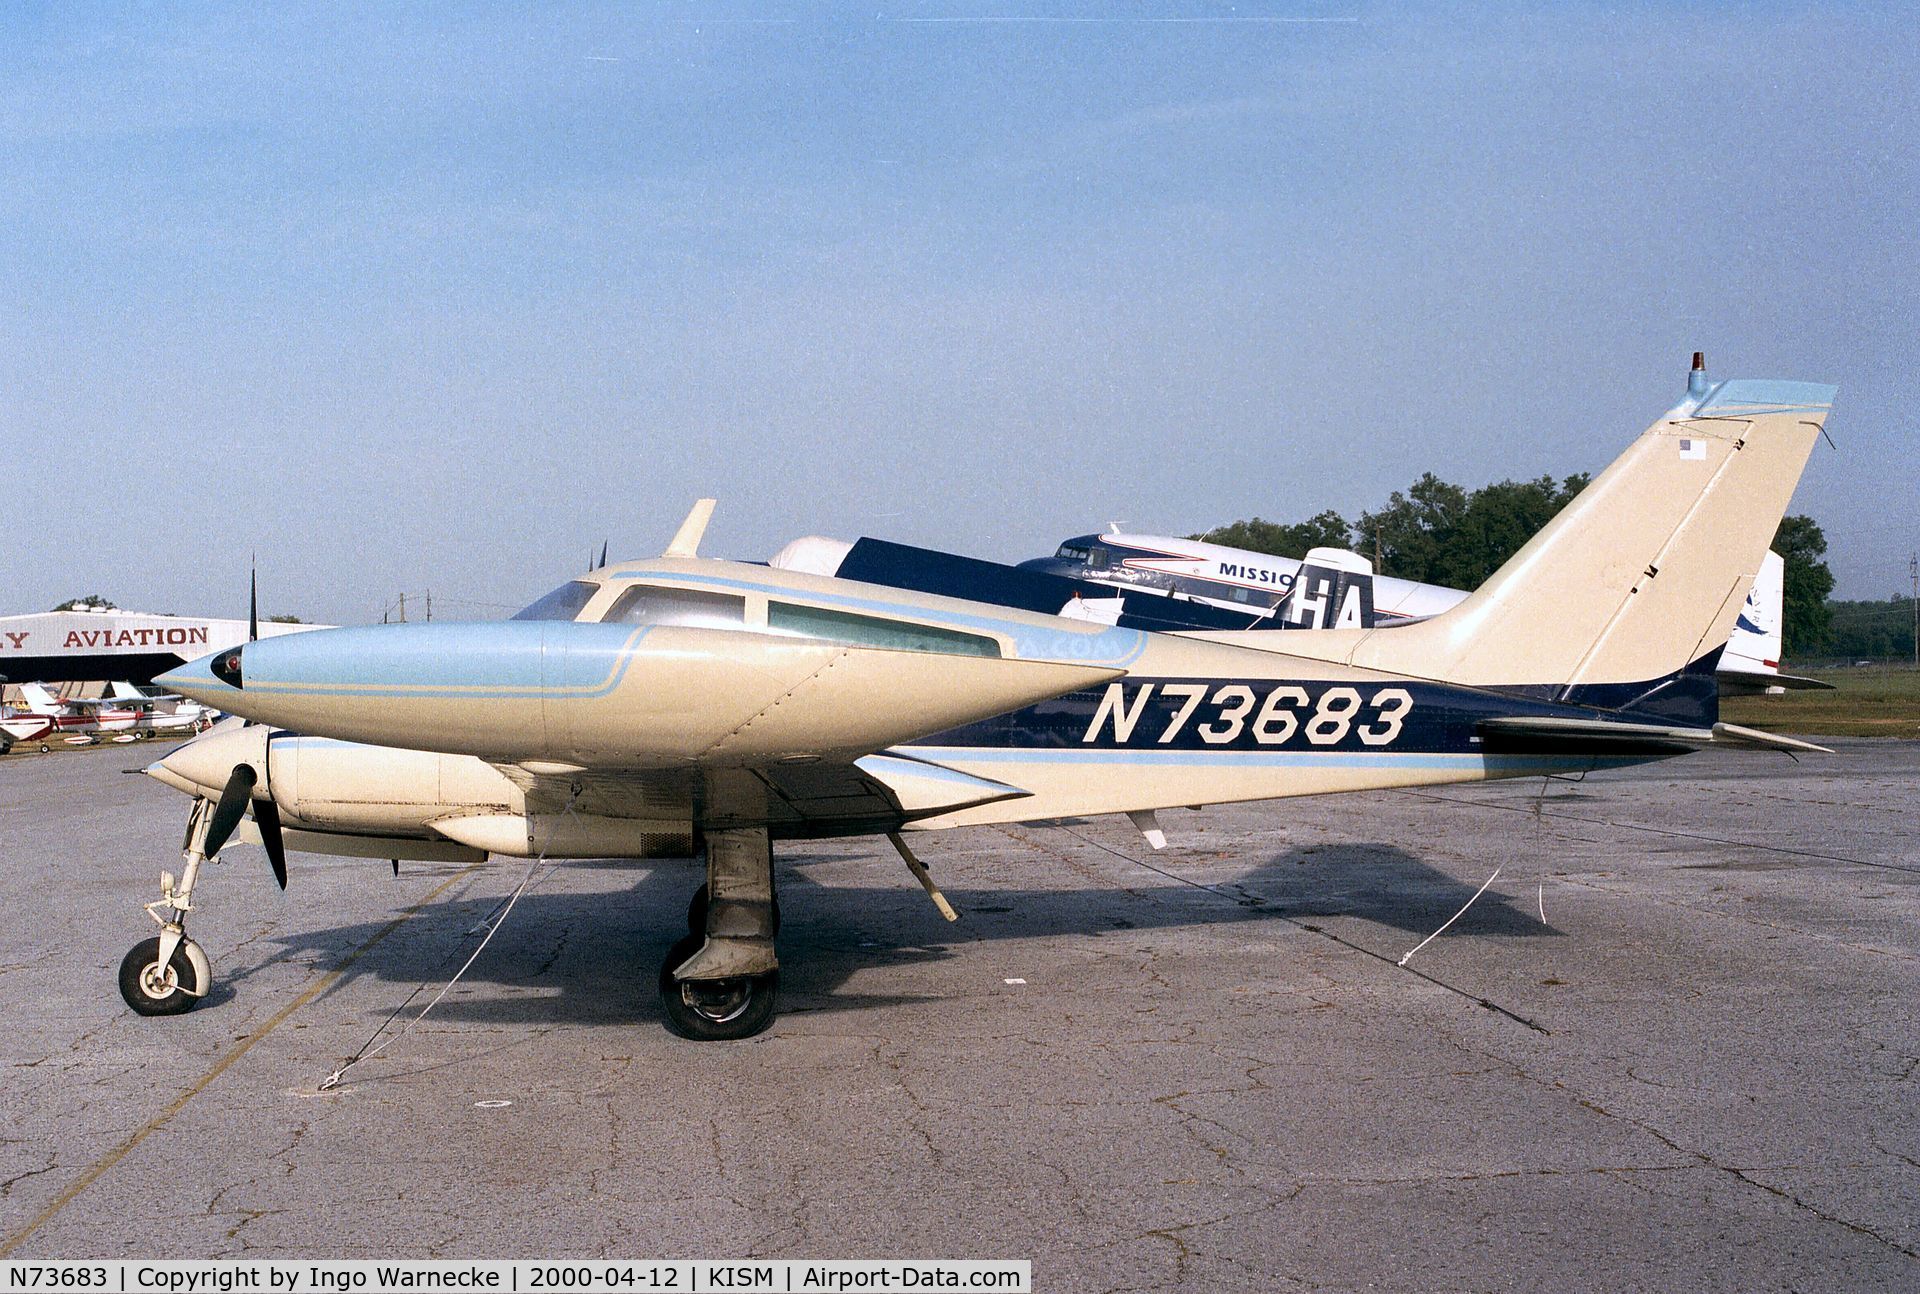 N73683, 1969 Cessna 310N C/N 310N-0014, Cessna 310N at Kissimmee airport, close to the Flying Tigers Aircraft Museum